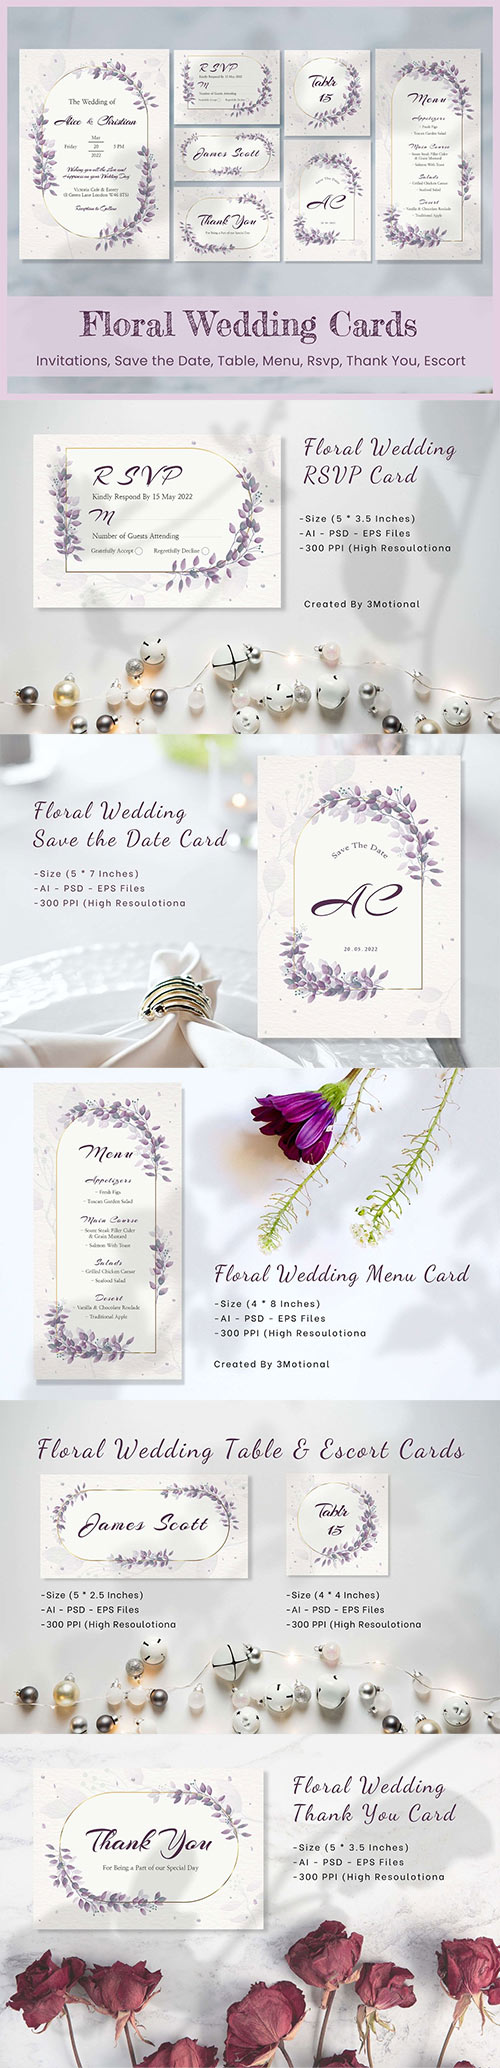 Floral Wedding Cards Templates 10185454